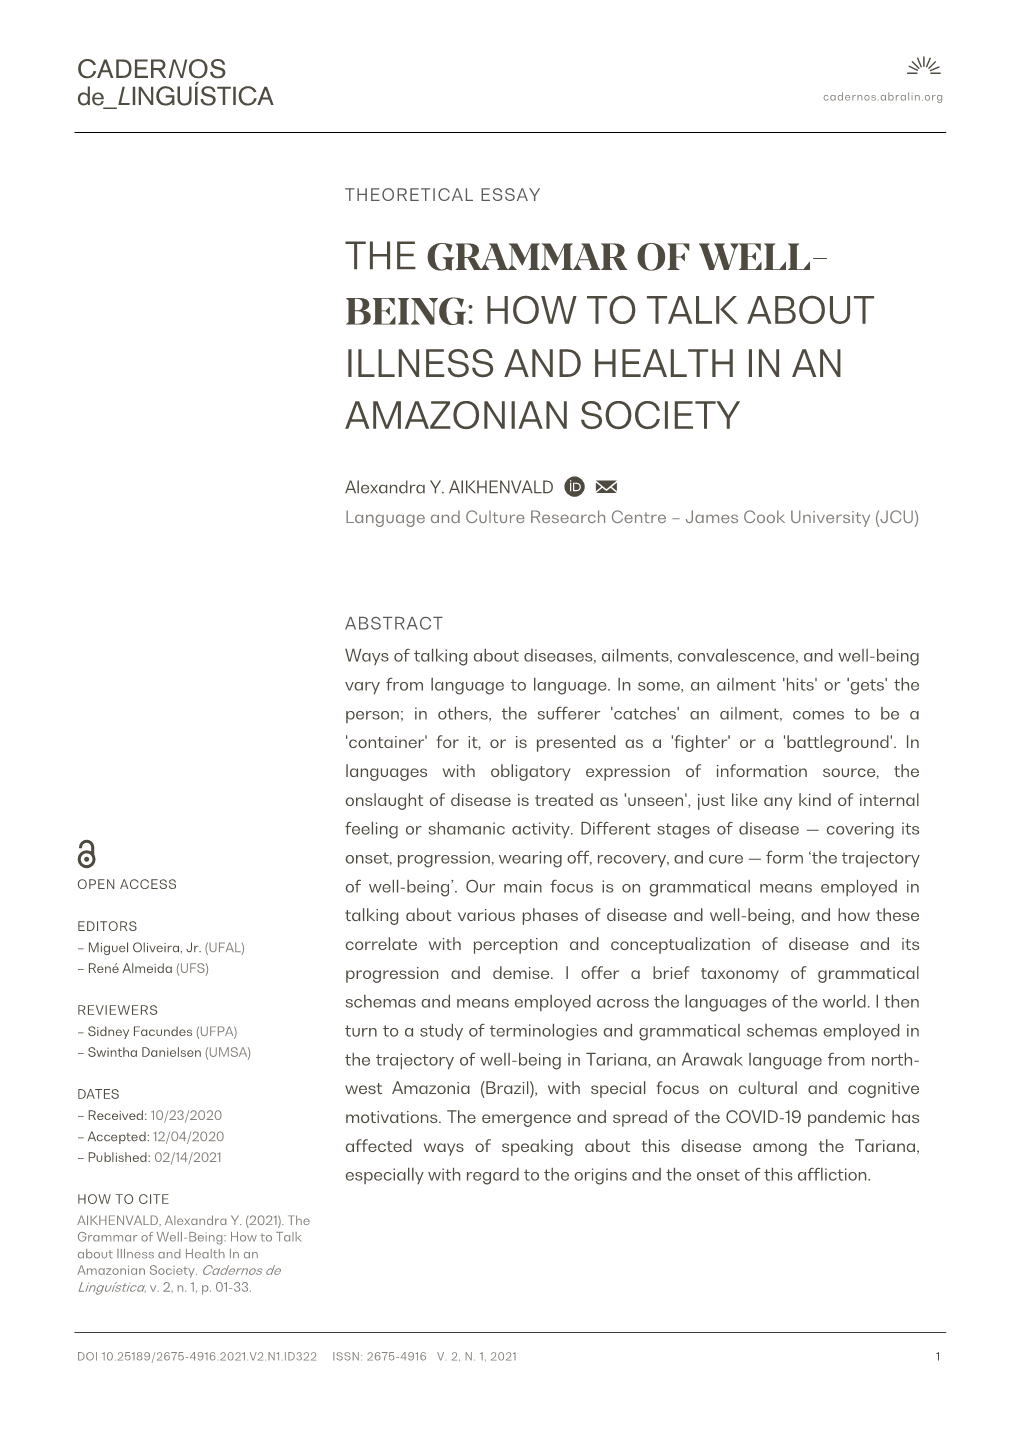 The Grammar of Well- Being: How to Talk About Illness and Health in an Amazonian Society